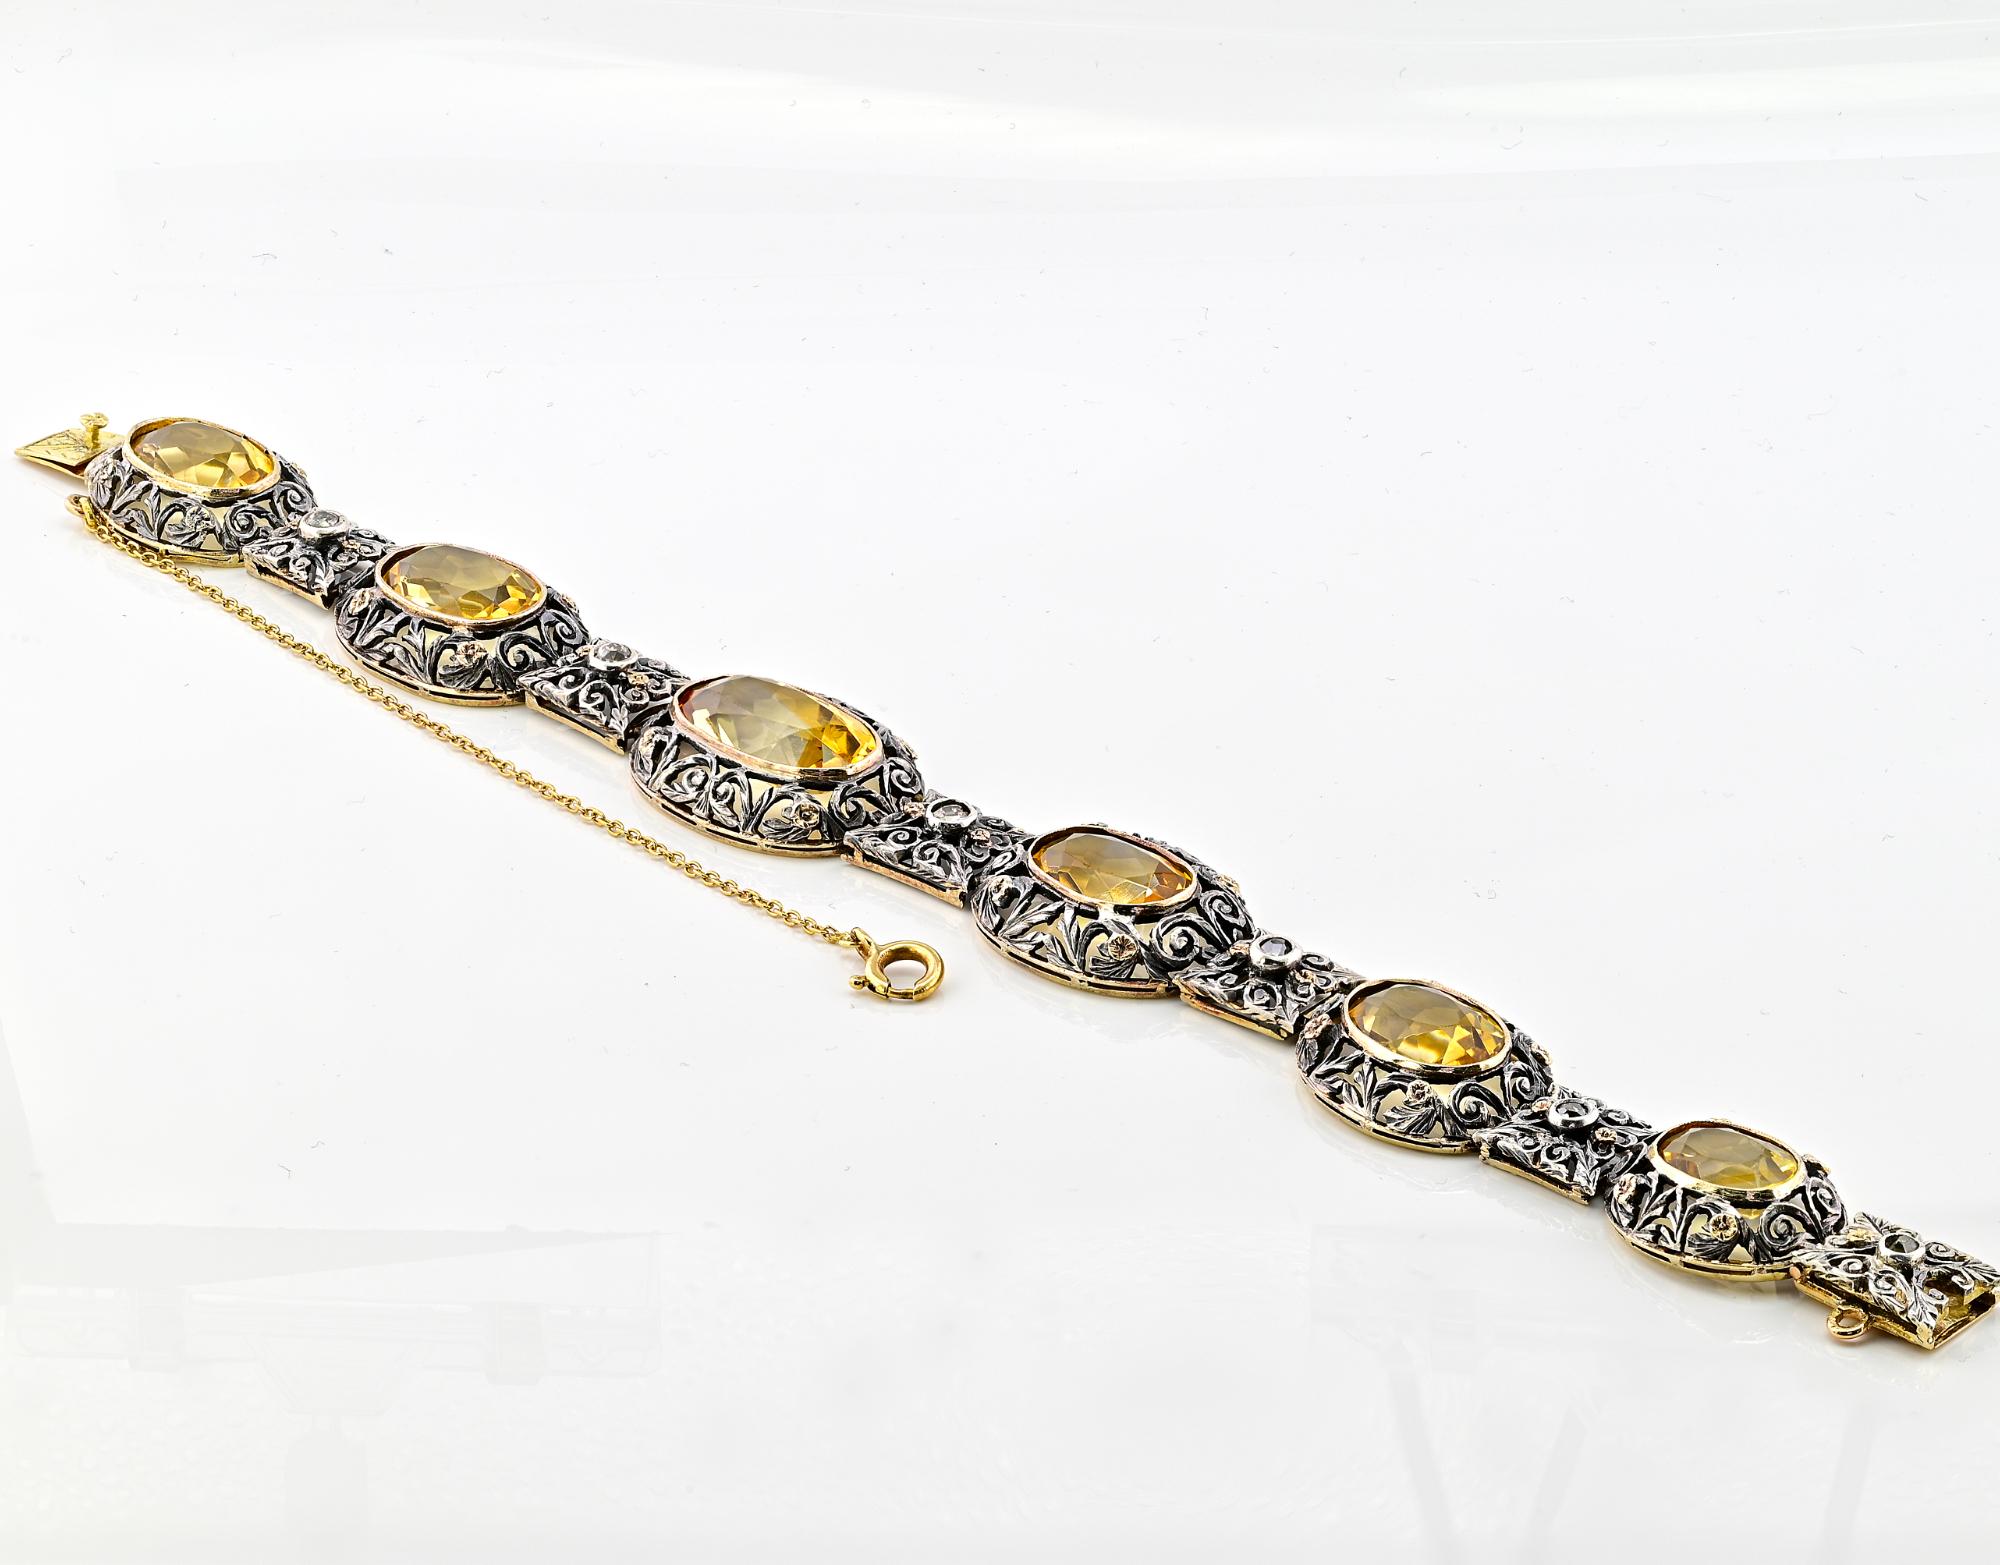 Edwardian 25.45 Ct. Natural Citrine Diamond 18 Kt/Silver Bracelet In Good Condition For Sale In Napoli, IT